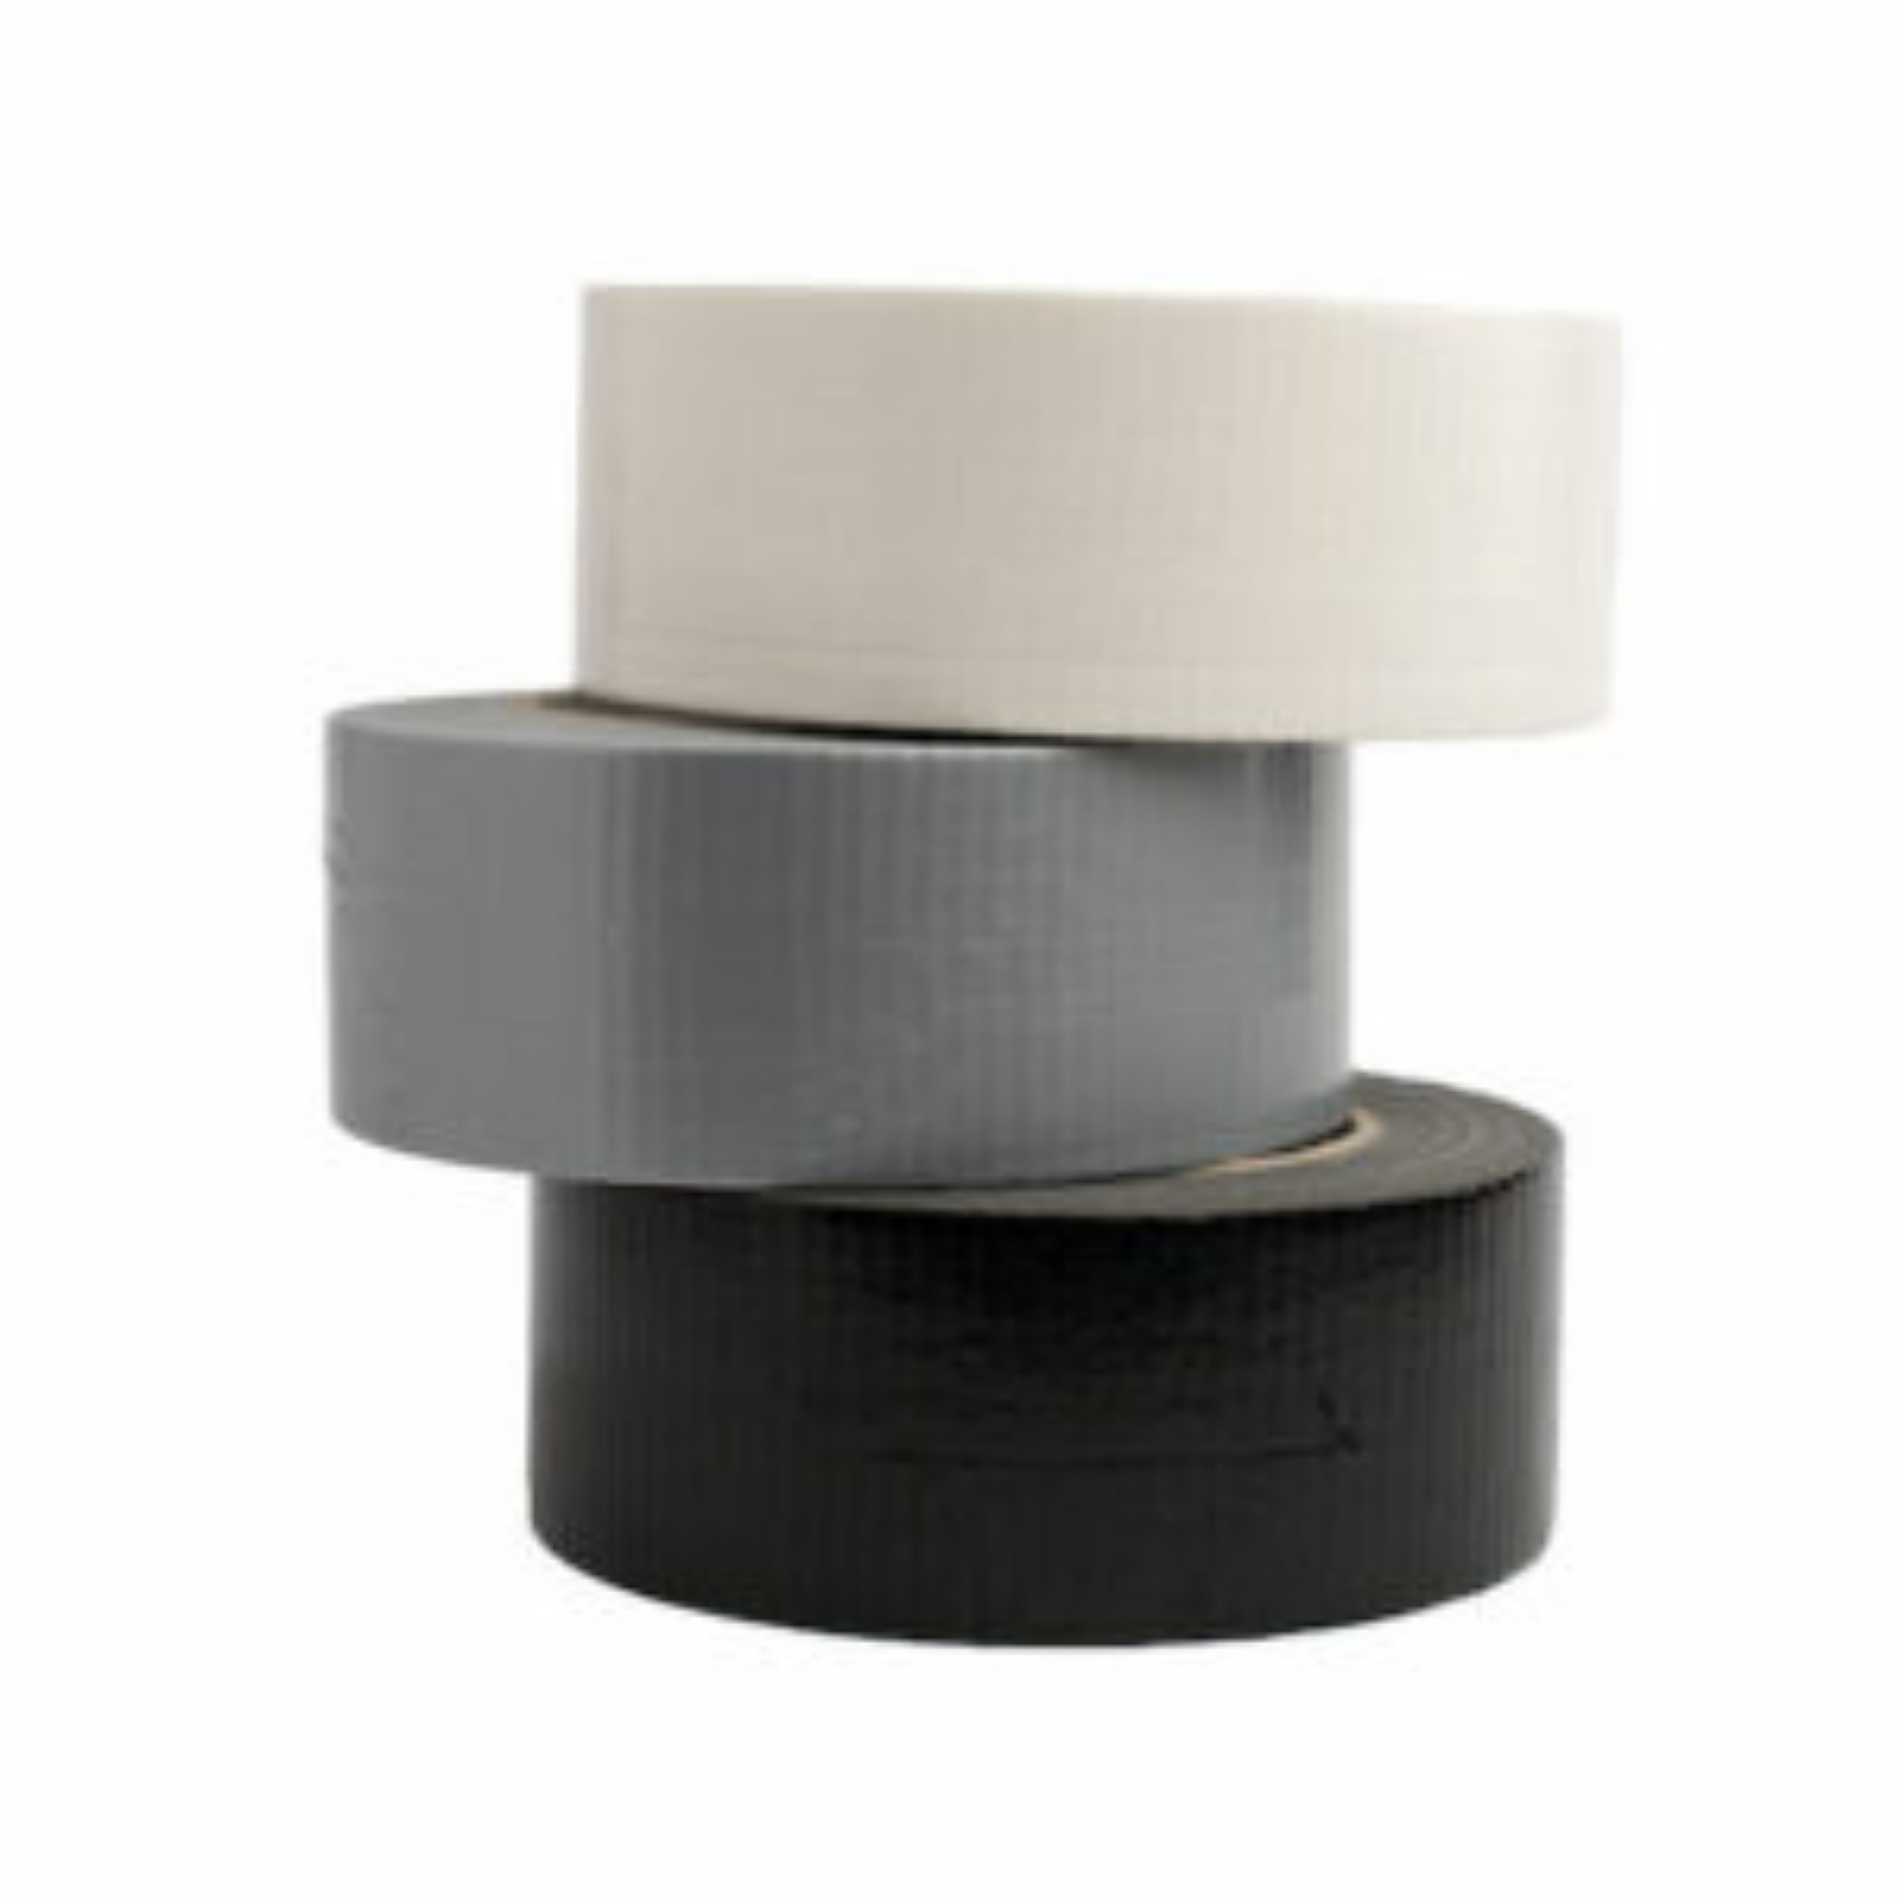 Picture of Krimpterm Cloth Gaffer Ducting Tape - Black (48mm x 50m)